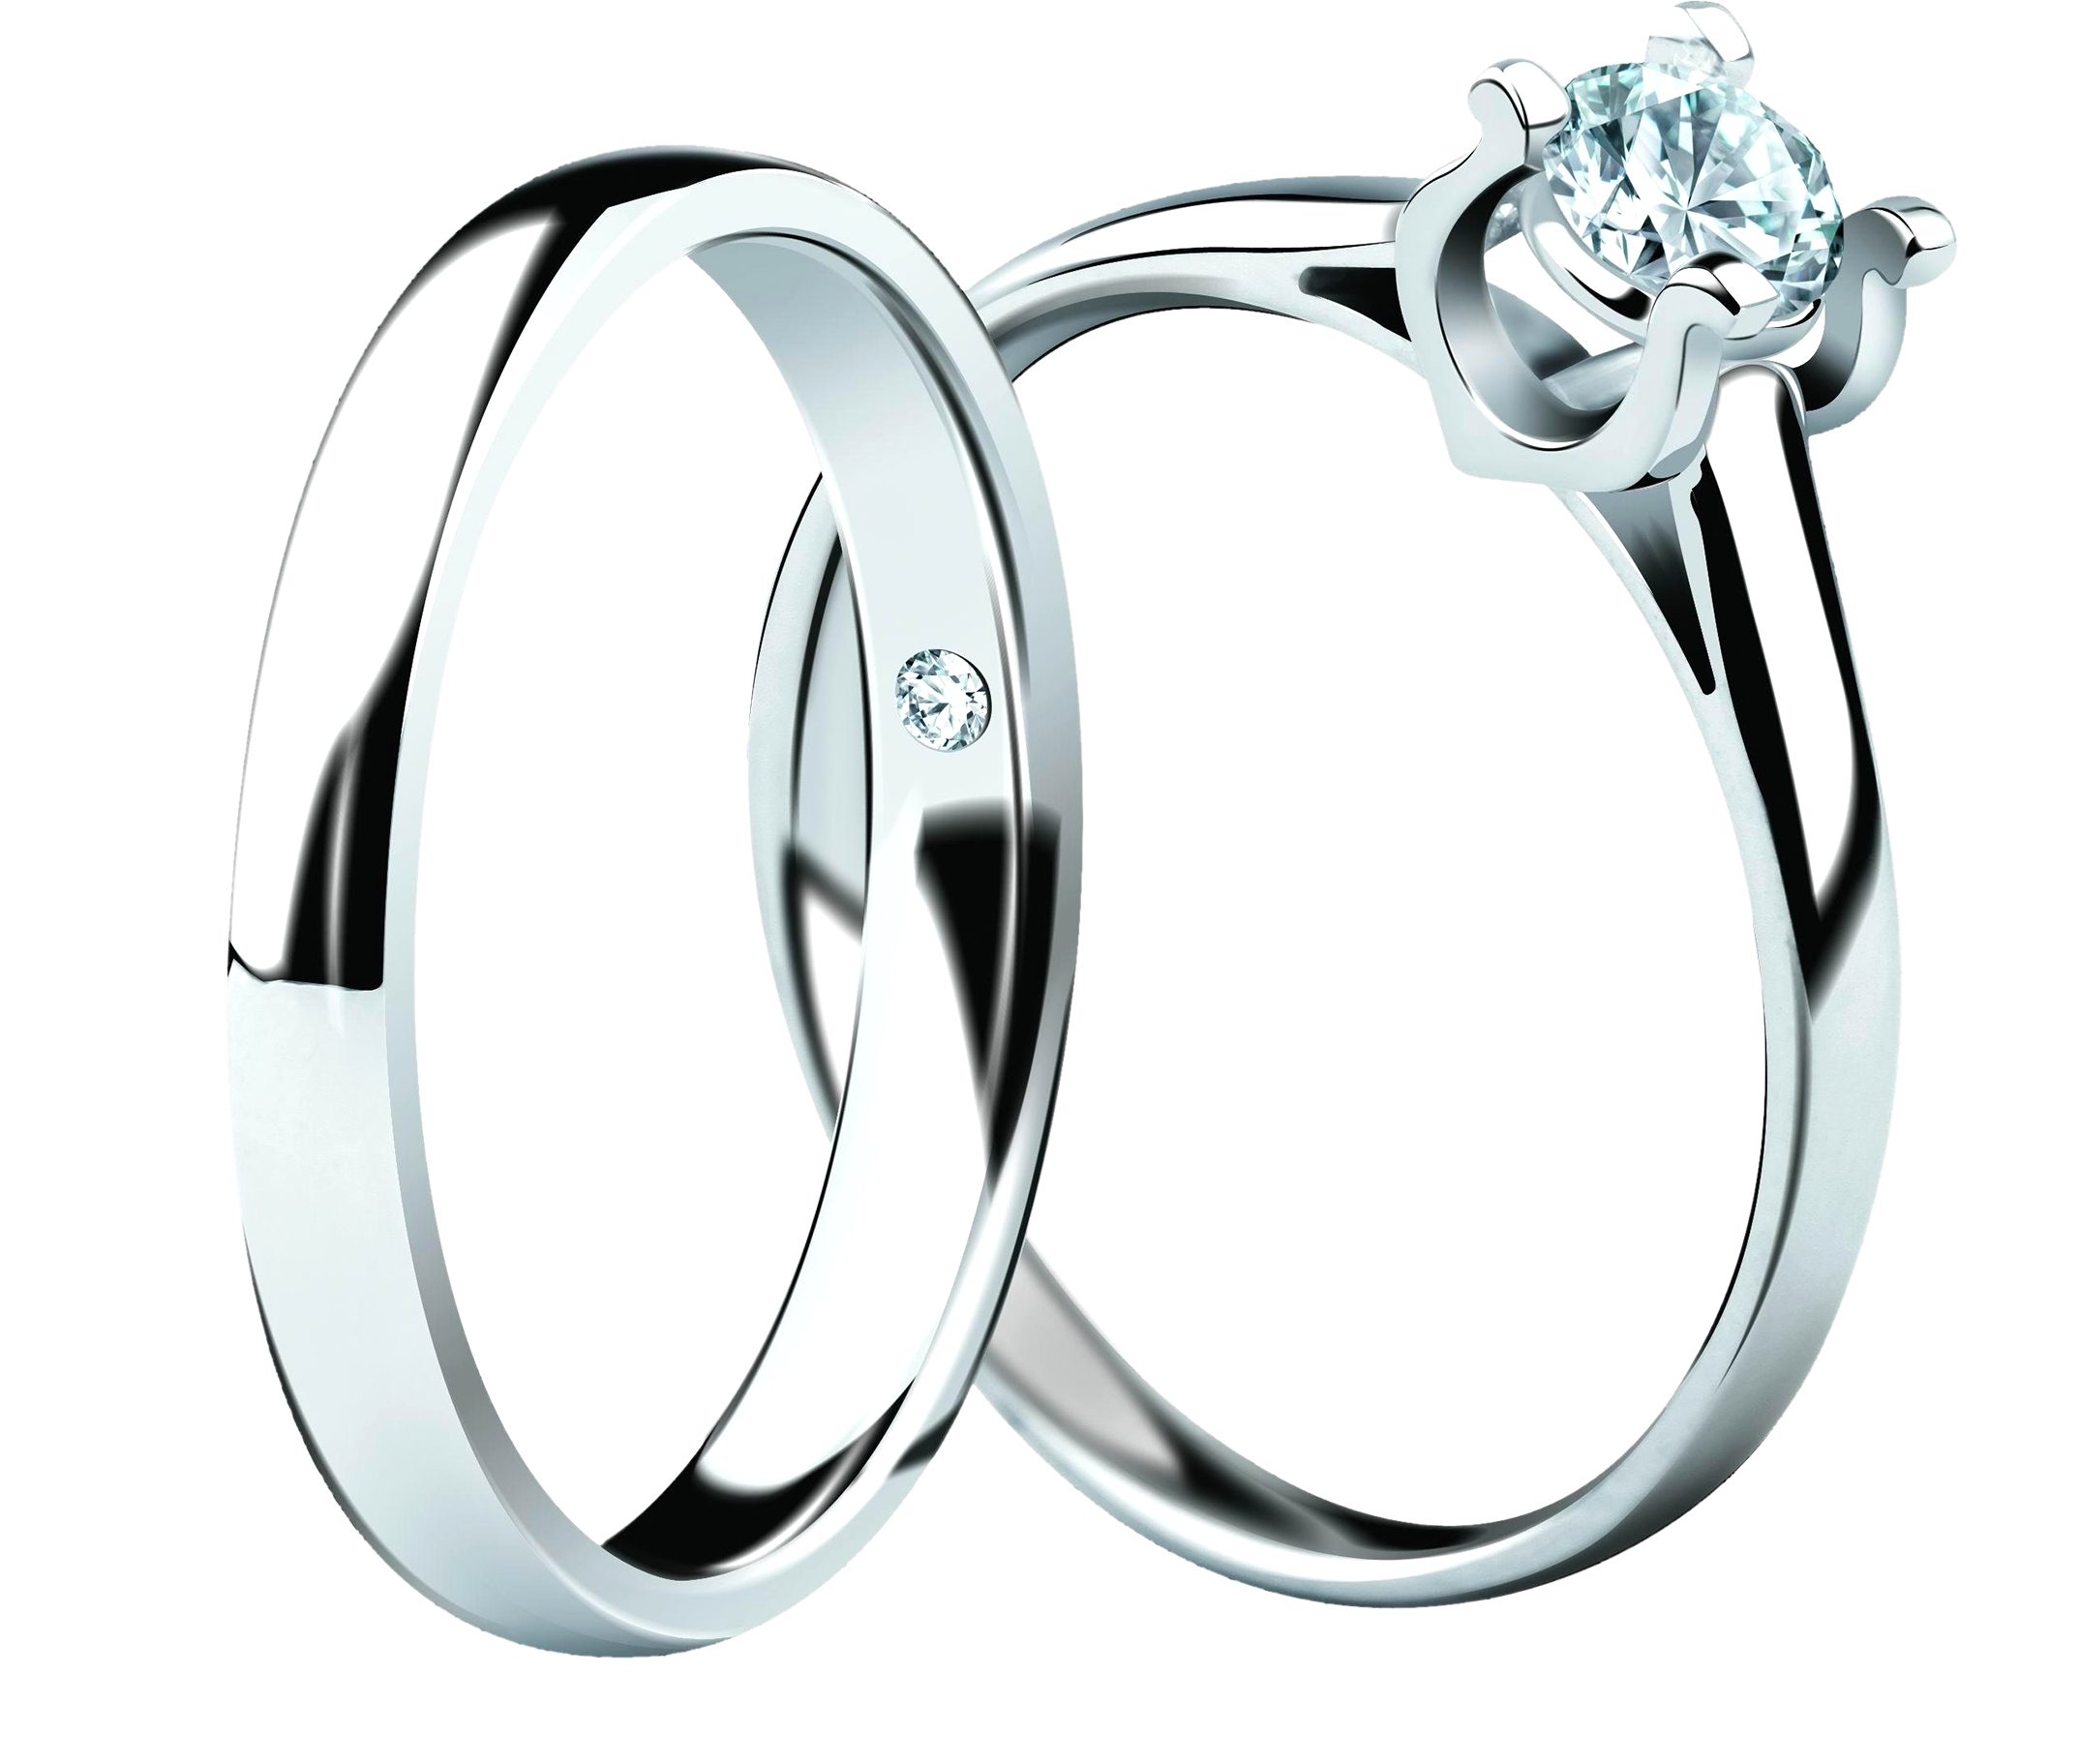 Silver Ring PNG High-Quality Image